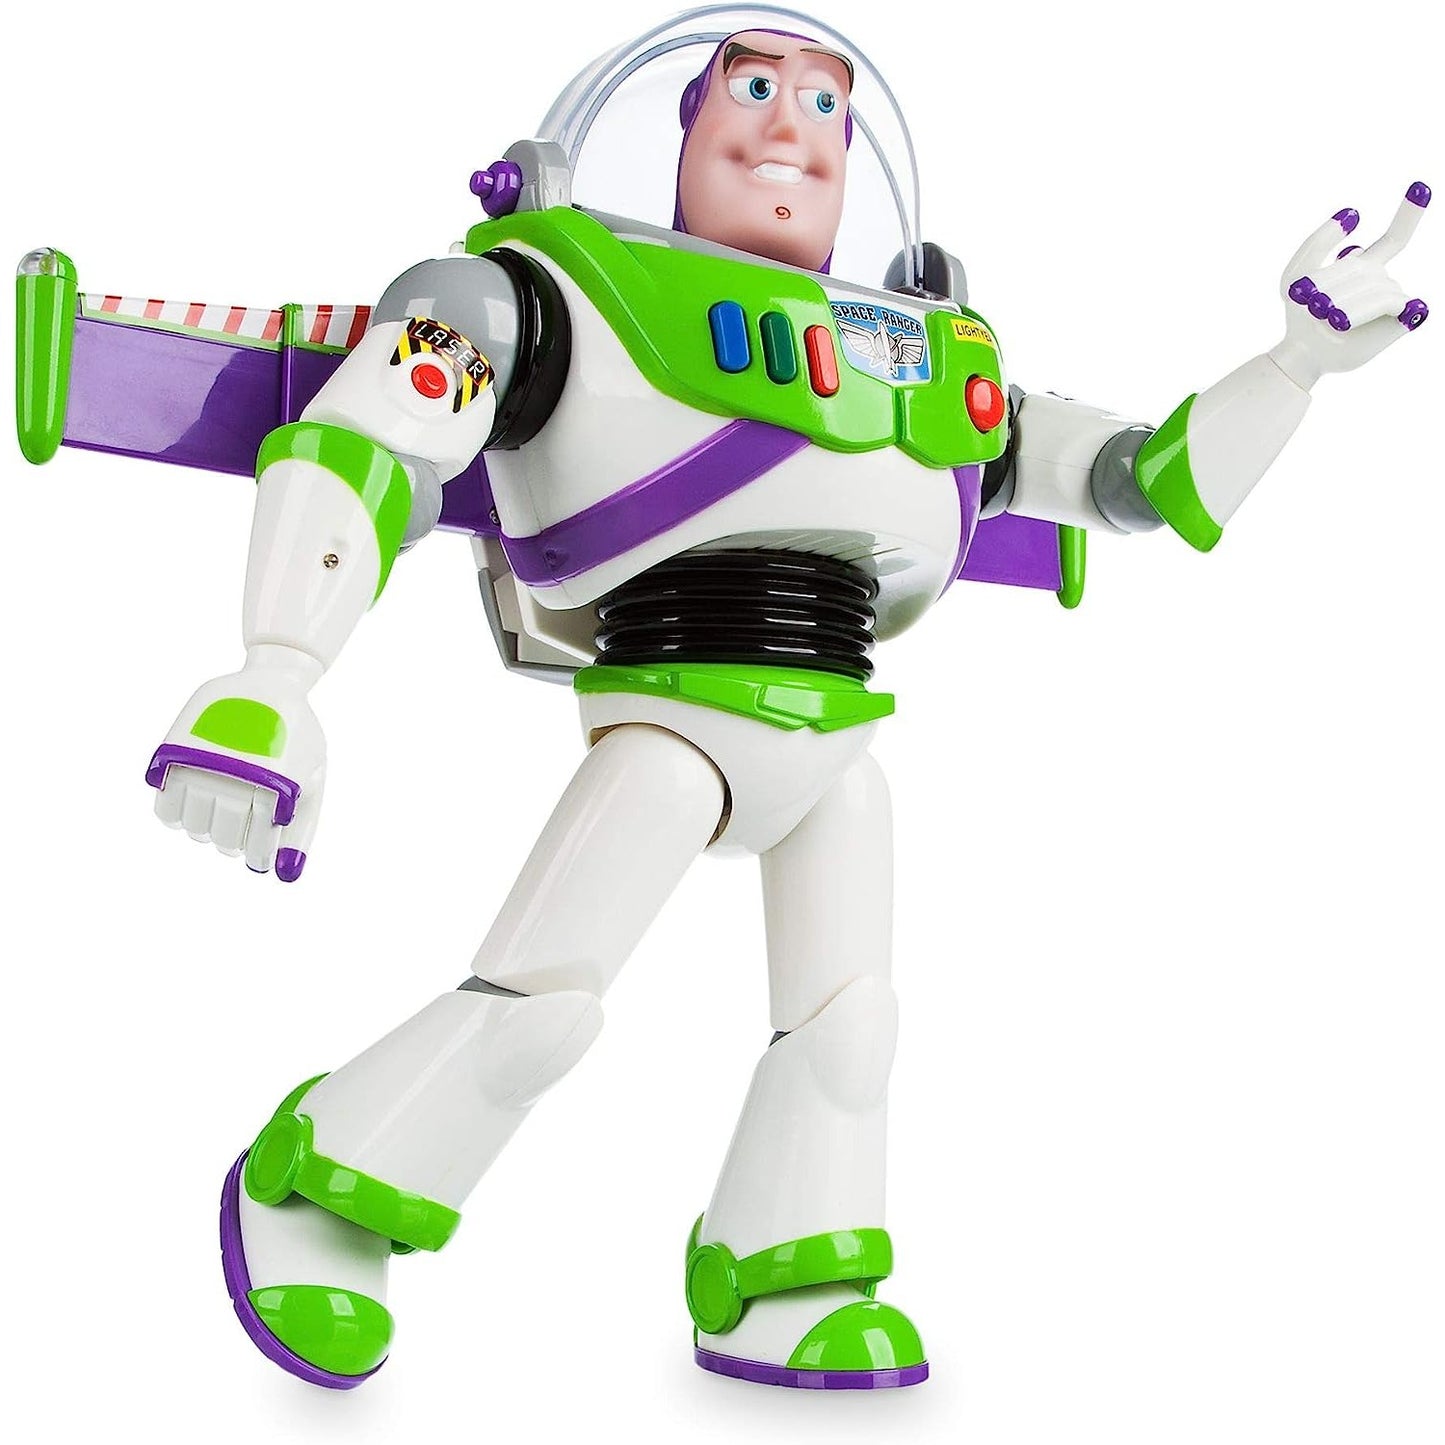 Disney Store Official Buzz Lightyear Interactive Talking Action Figure/\.